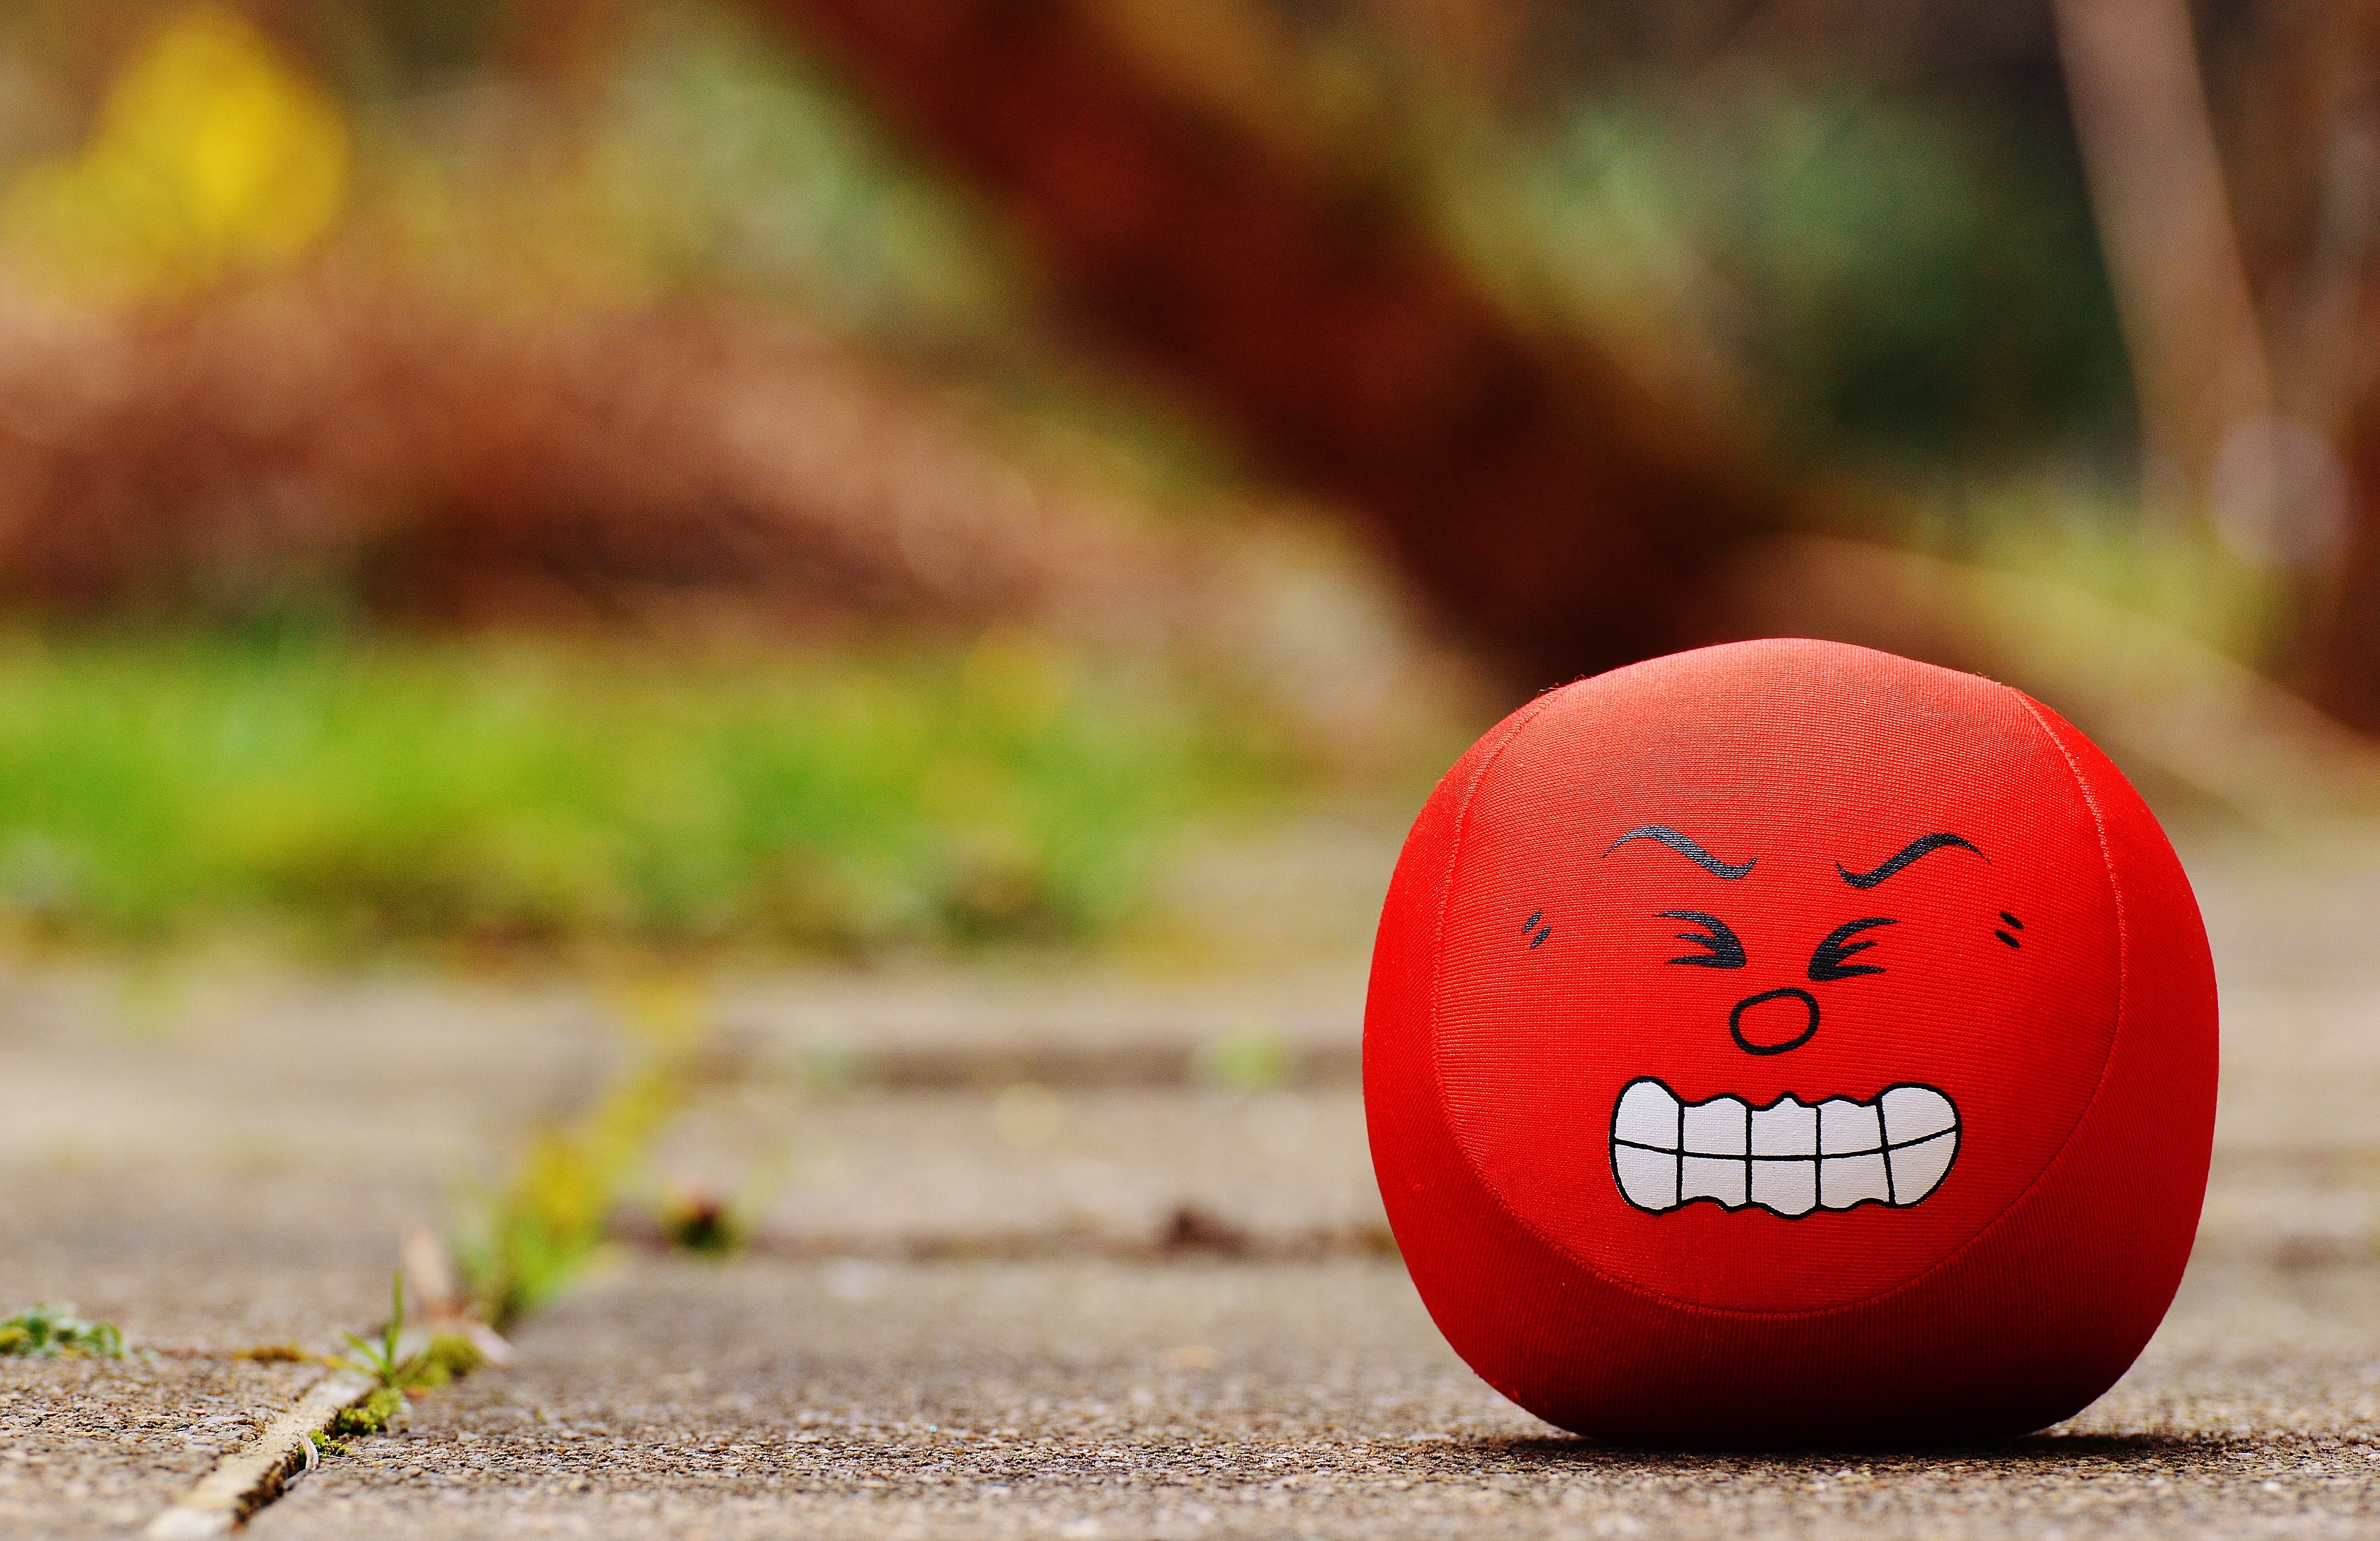 Evil, Funny, Rage, Red, Sour, Smiley, focus on foreground, red